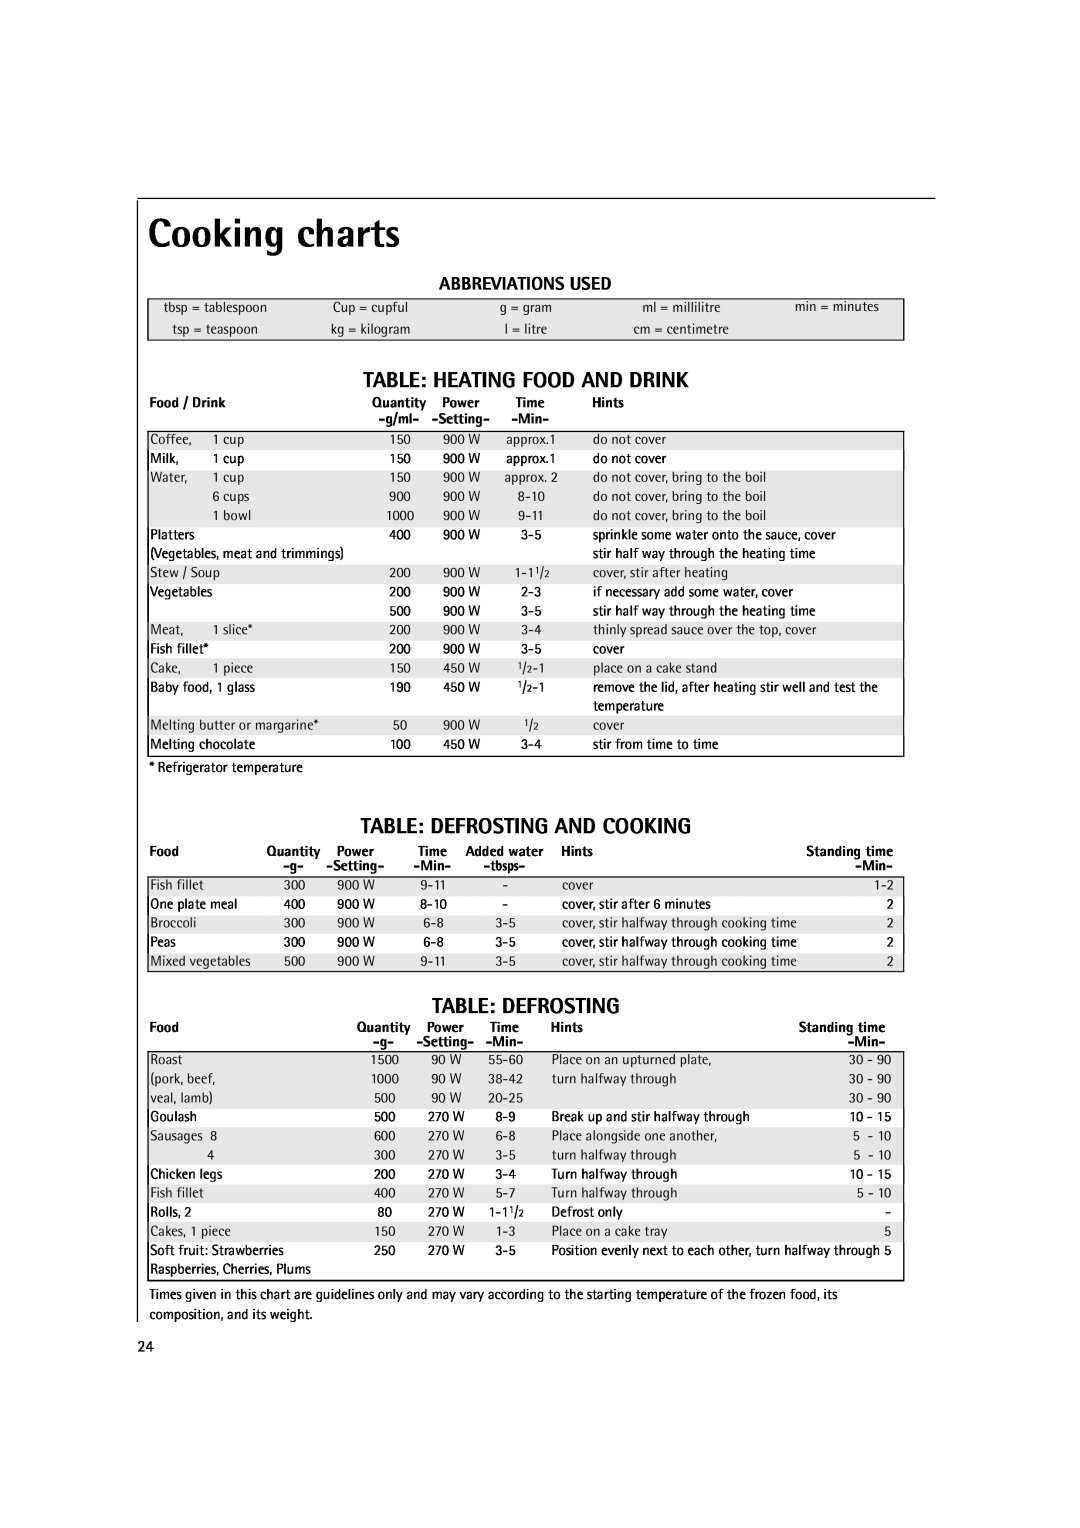 AEG MC2661E Cooking charts, Table: Heating Food And Drink, Table: Defrosting And Cooking, Abbreviations Used, Food / Drink 